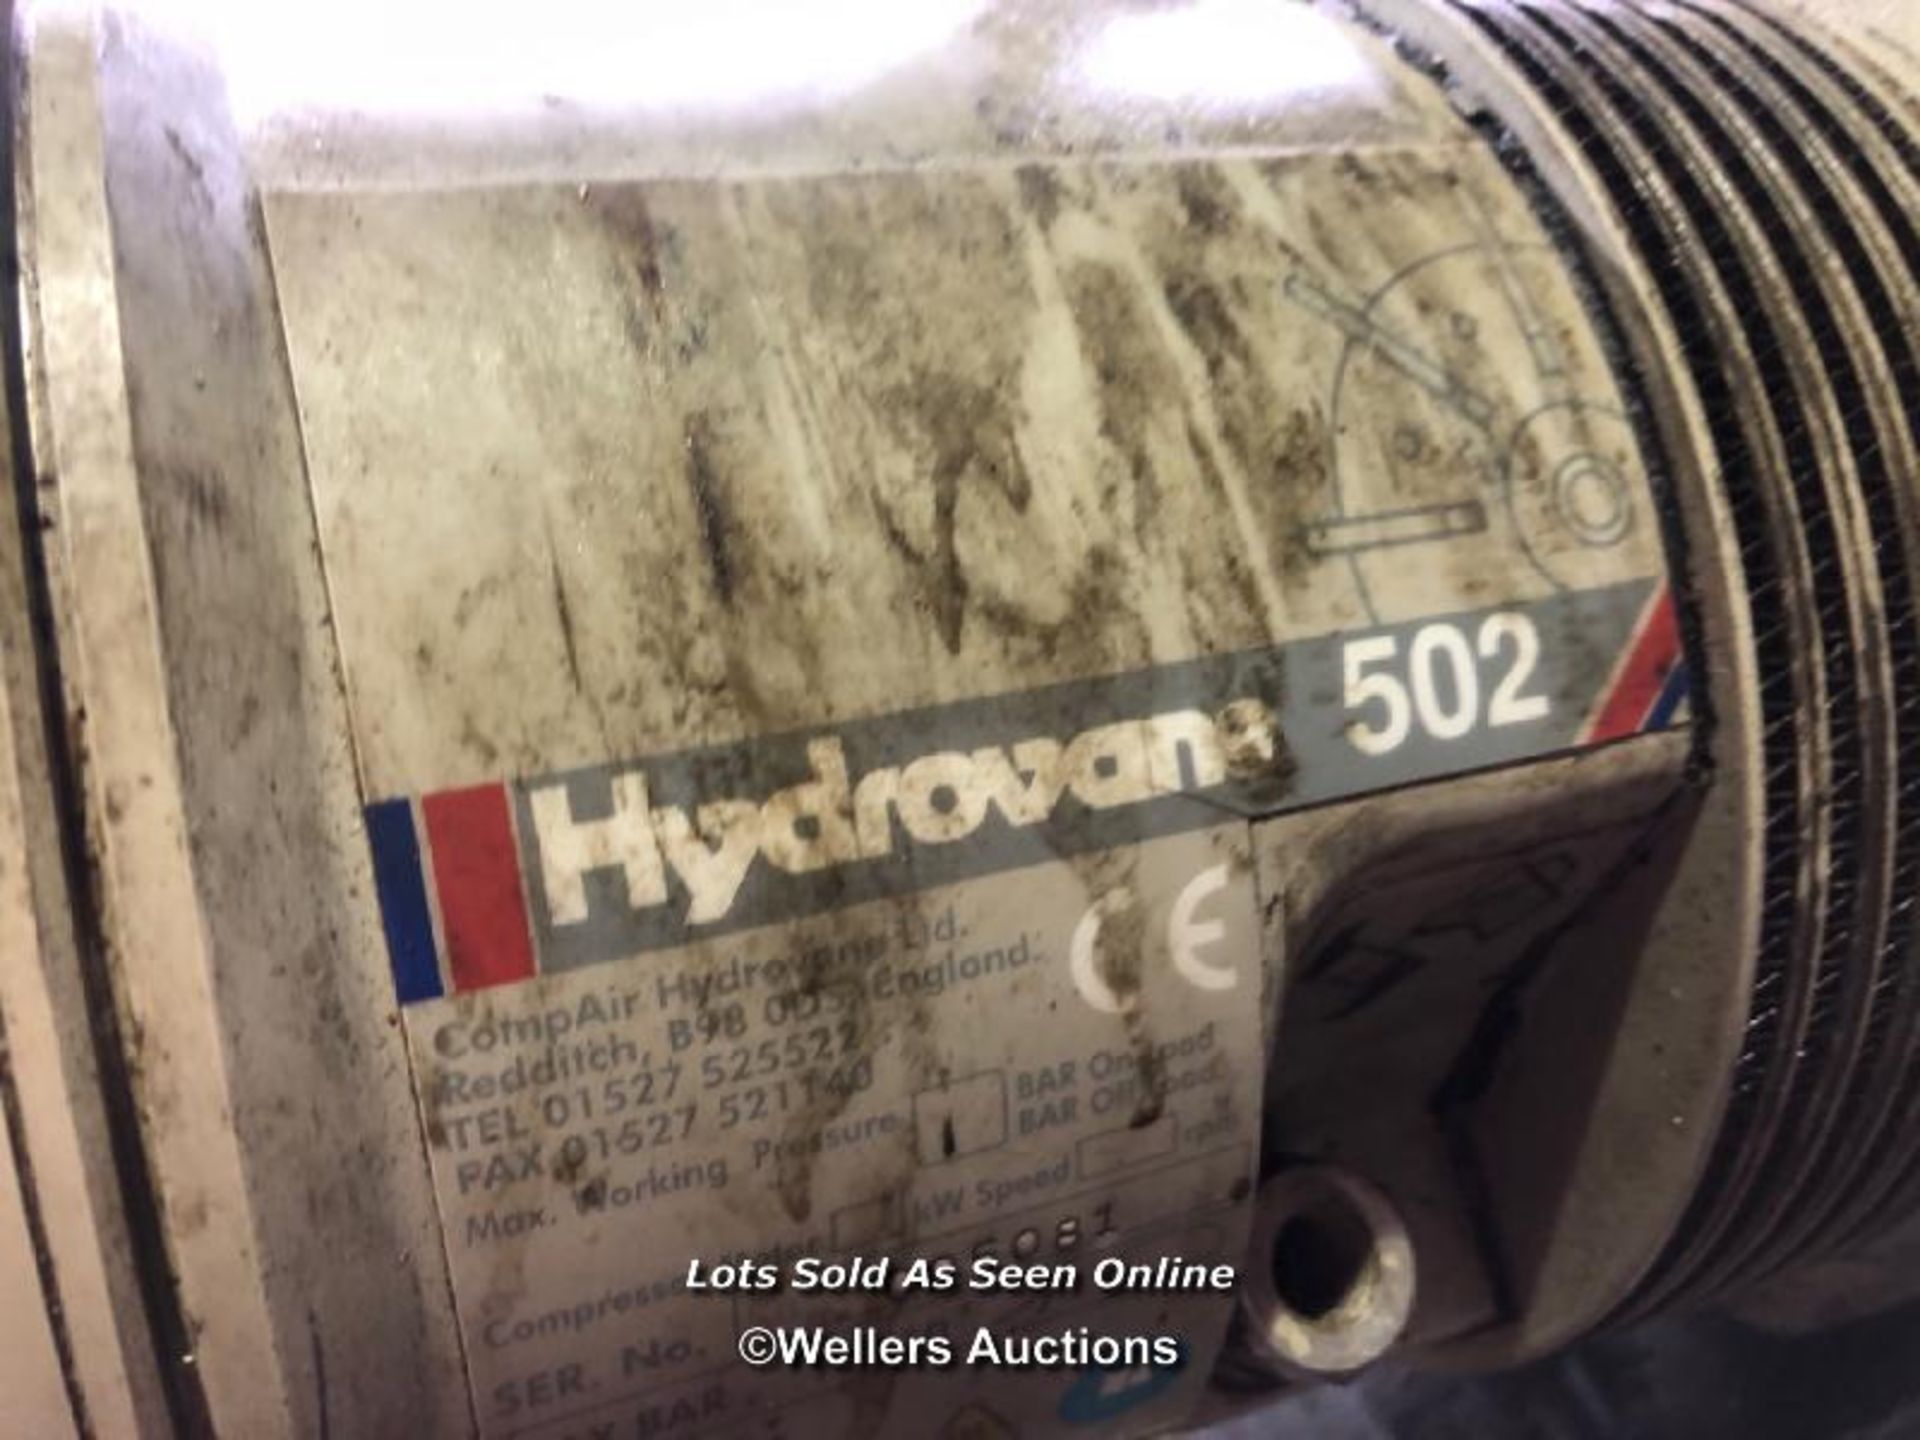 HYDROVANE 502 240V AIR COMPRESSOR, WITH 2 GAL. OF OIL, IN WORKING ORDER - Image 6 of 6